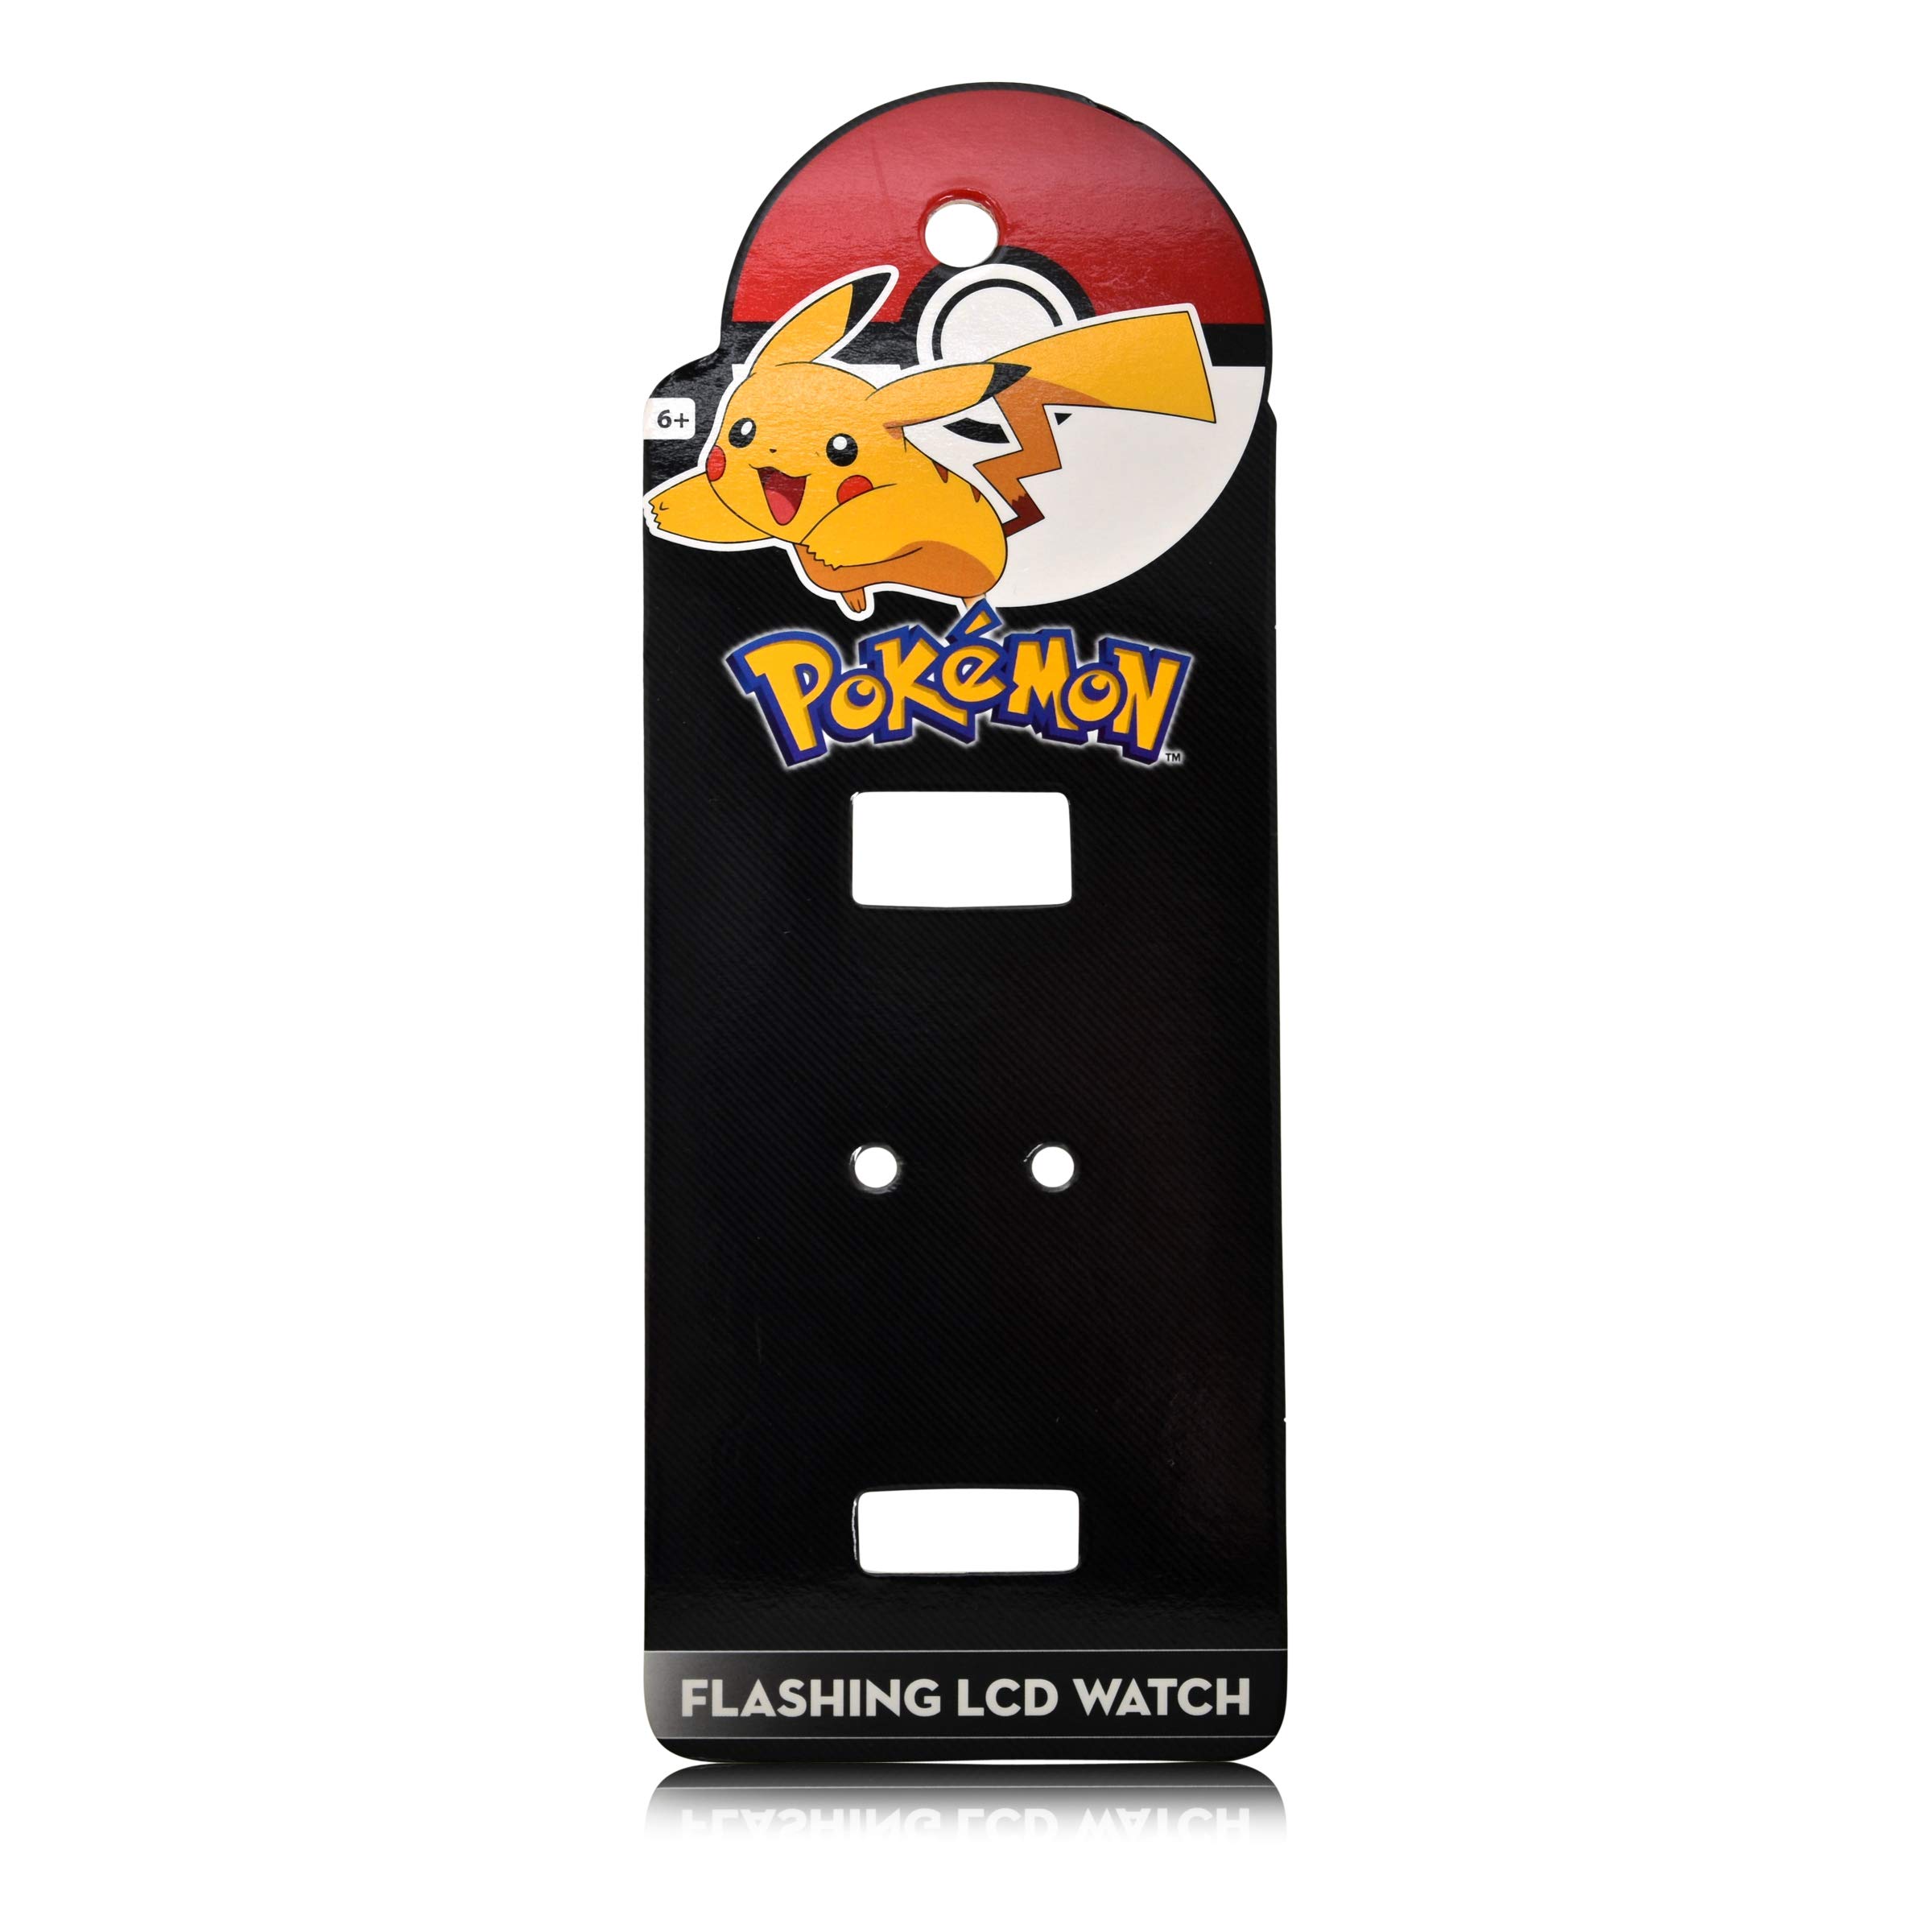 Accutime Kids Pokemon Digital LCD Quartz Watch for Boys, Girls, and Adults All Ages